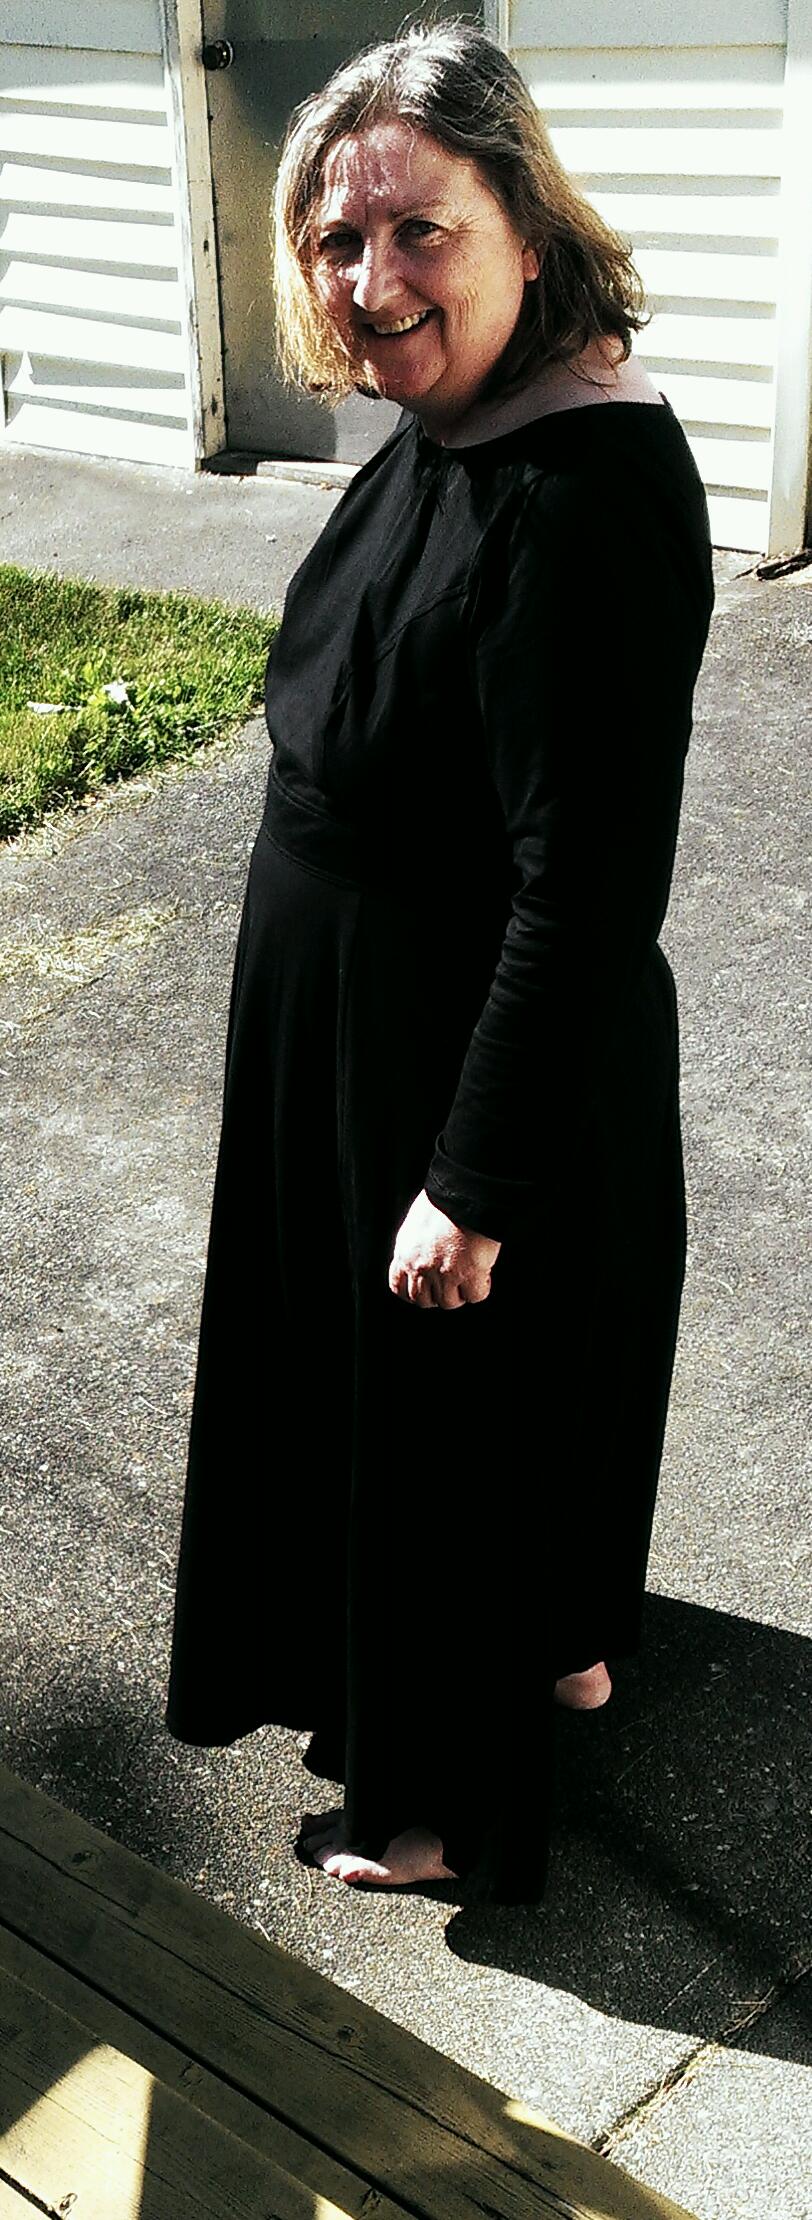 a middle aged white woman with medium length hair wears a long, long-sleeved black dress and bare feet